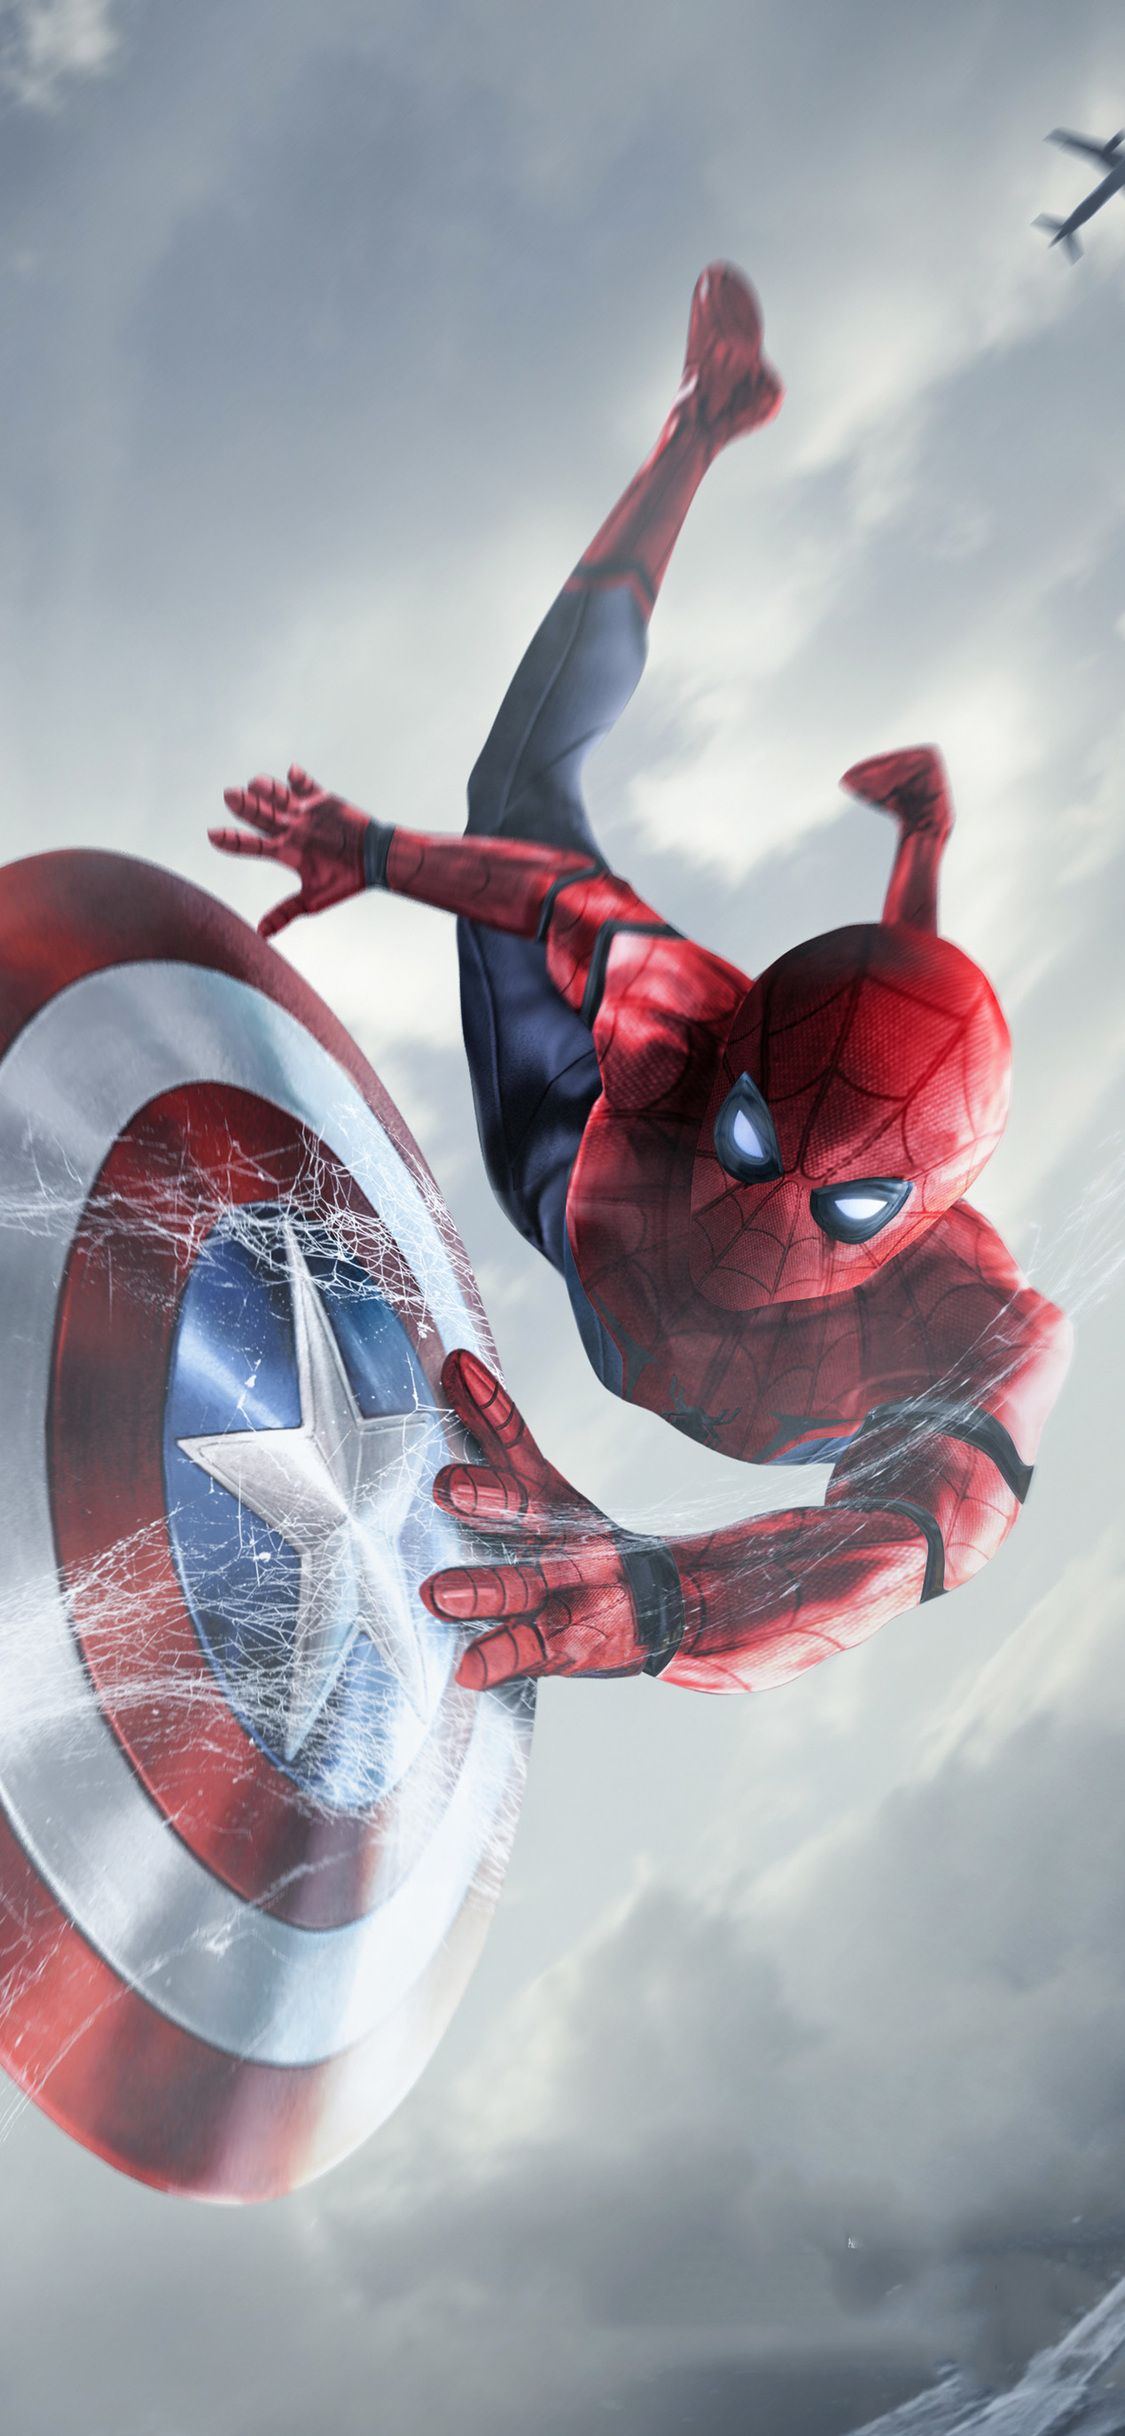 Spiderman Catching Captain America Shield iPhone XS